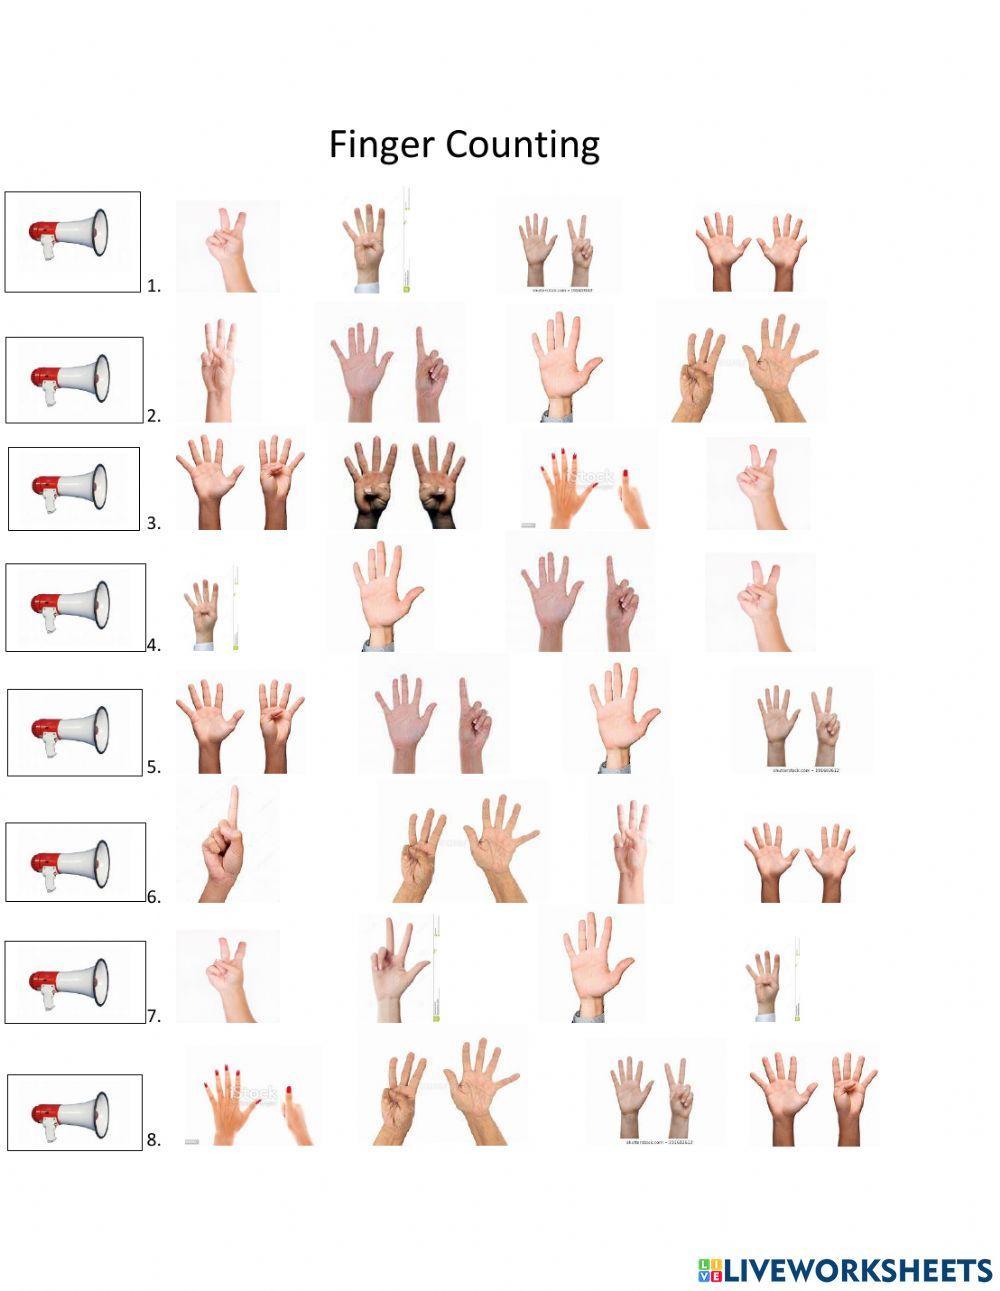 Finger counting